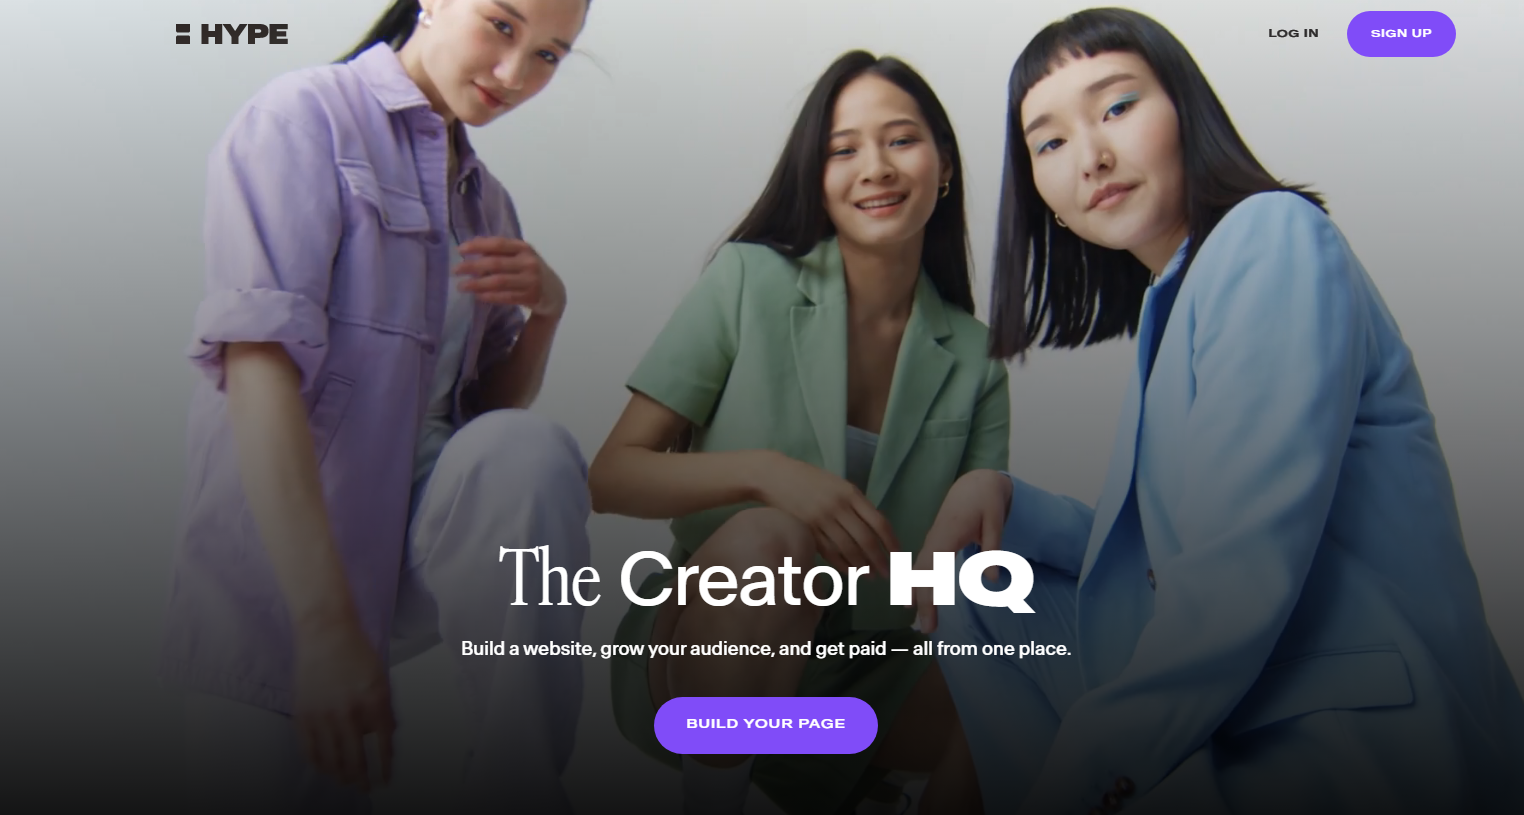 Hype Raises $10m in Series A Funding to Expand its All-in-one Marketing and Payments Platform for Creators.